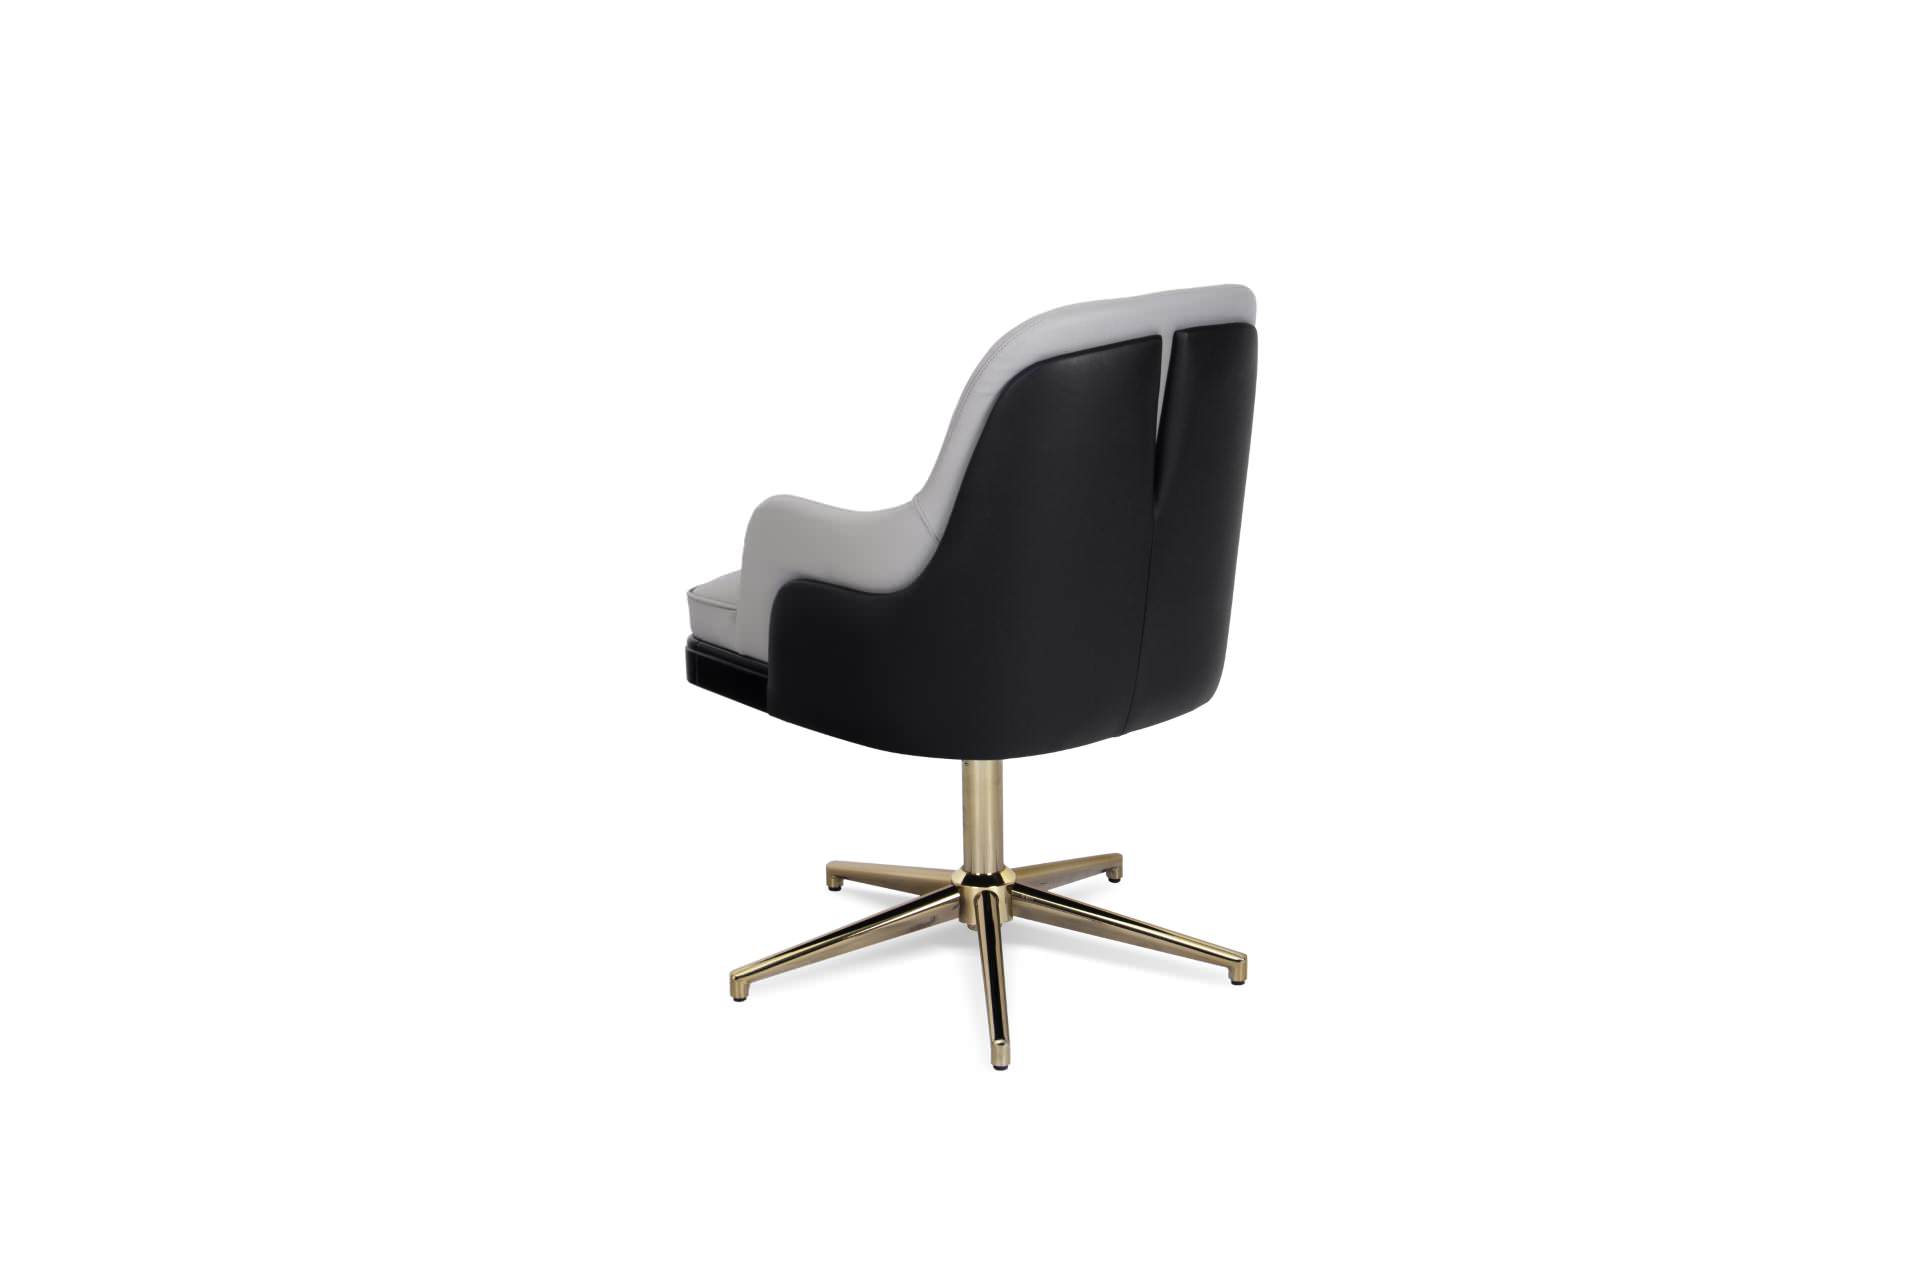 No comfortability was compromised in this smaller version, an office chair made with the best materials. Like the original design, it’s an item of boundless elegance (...)